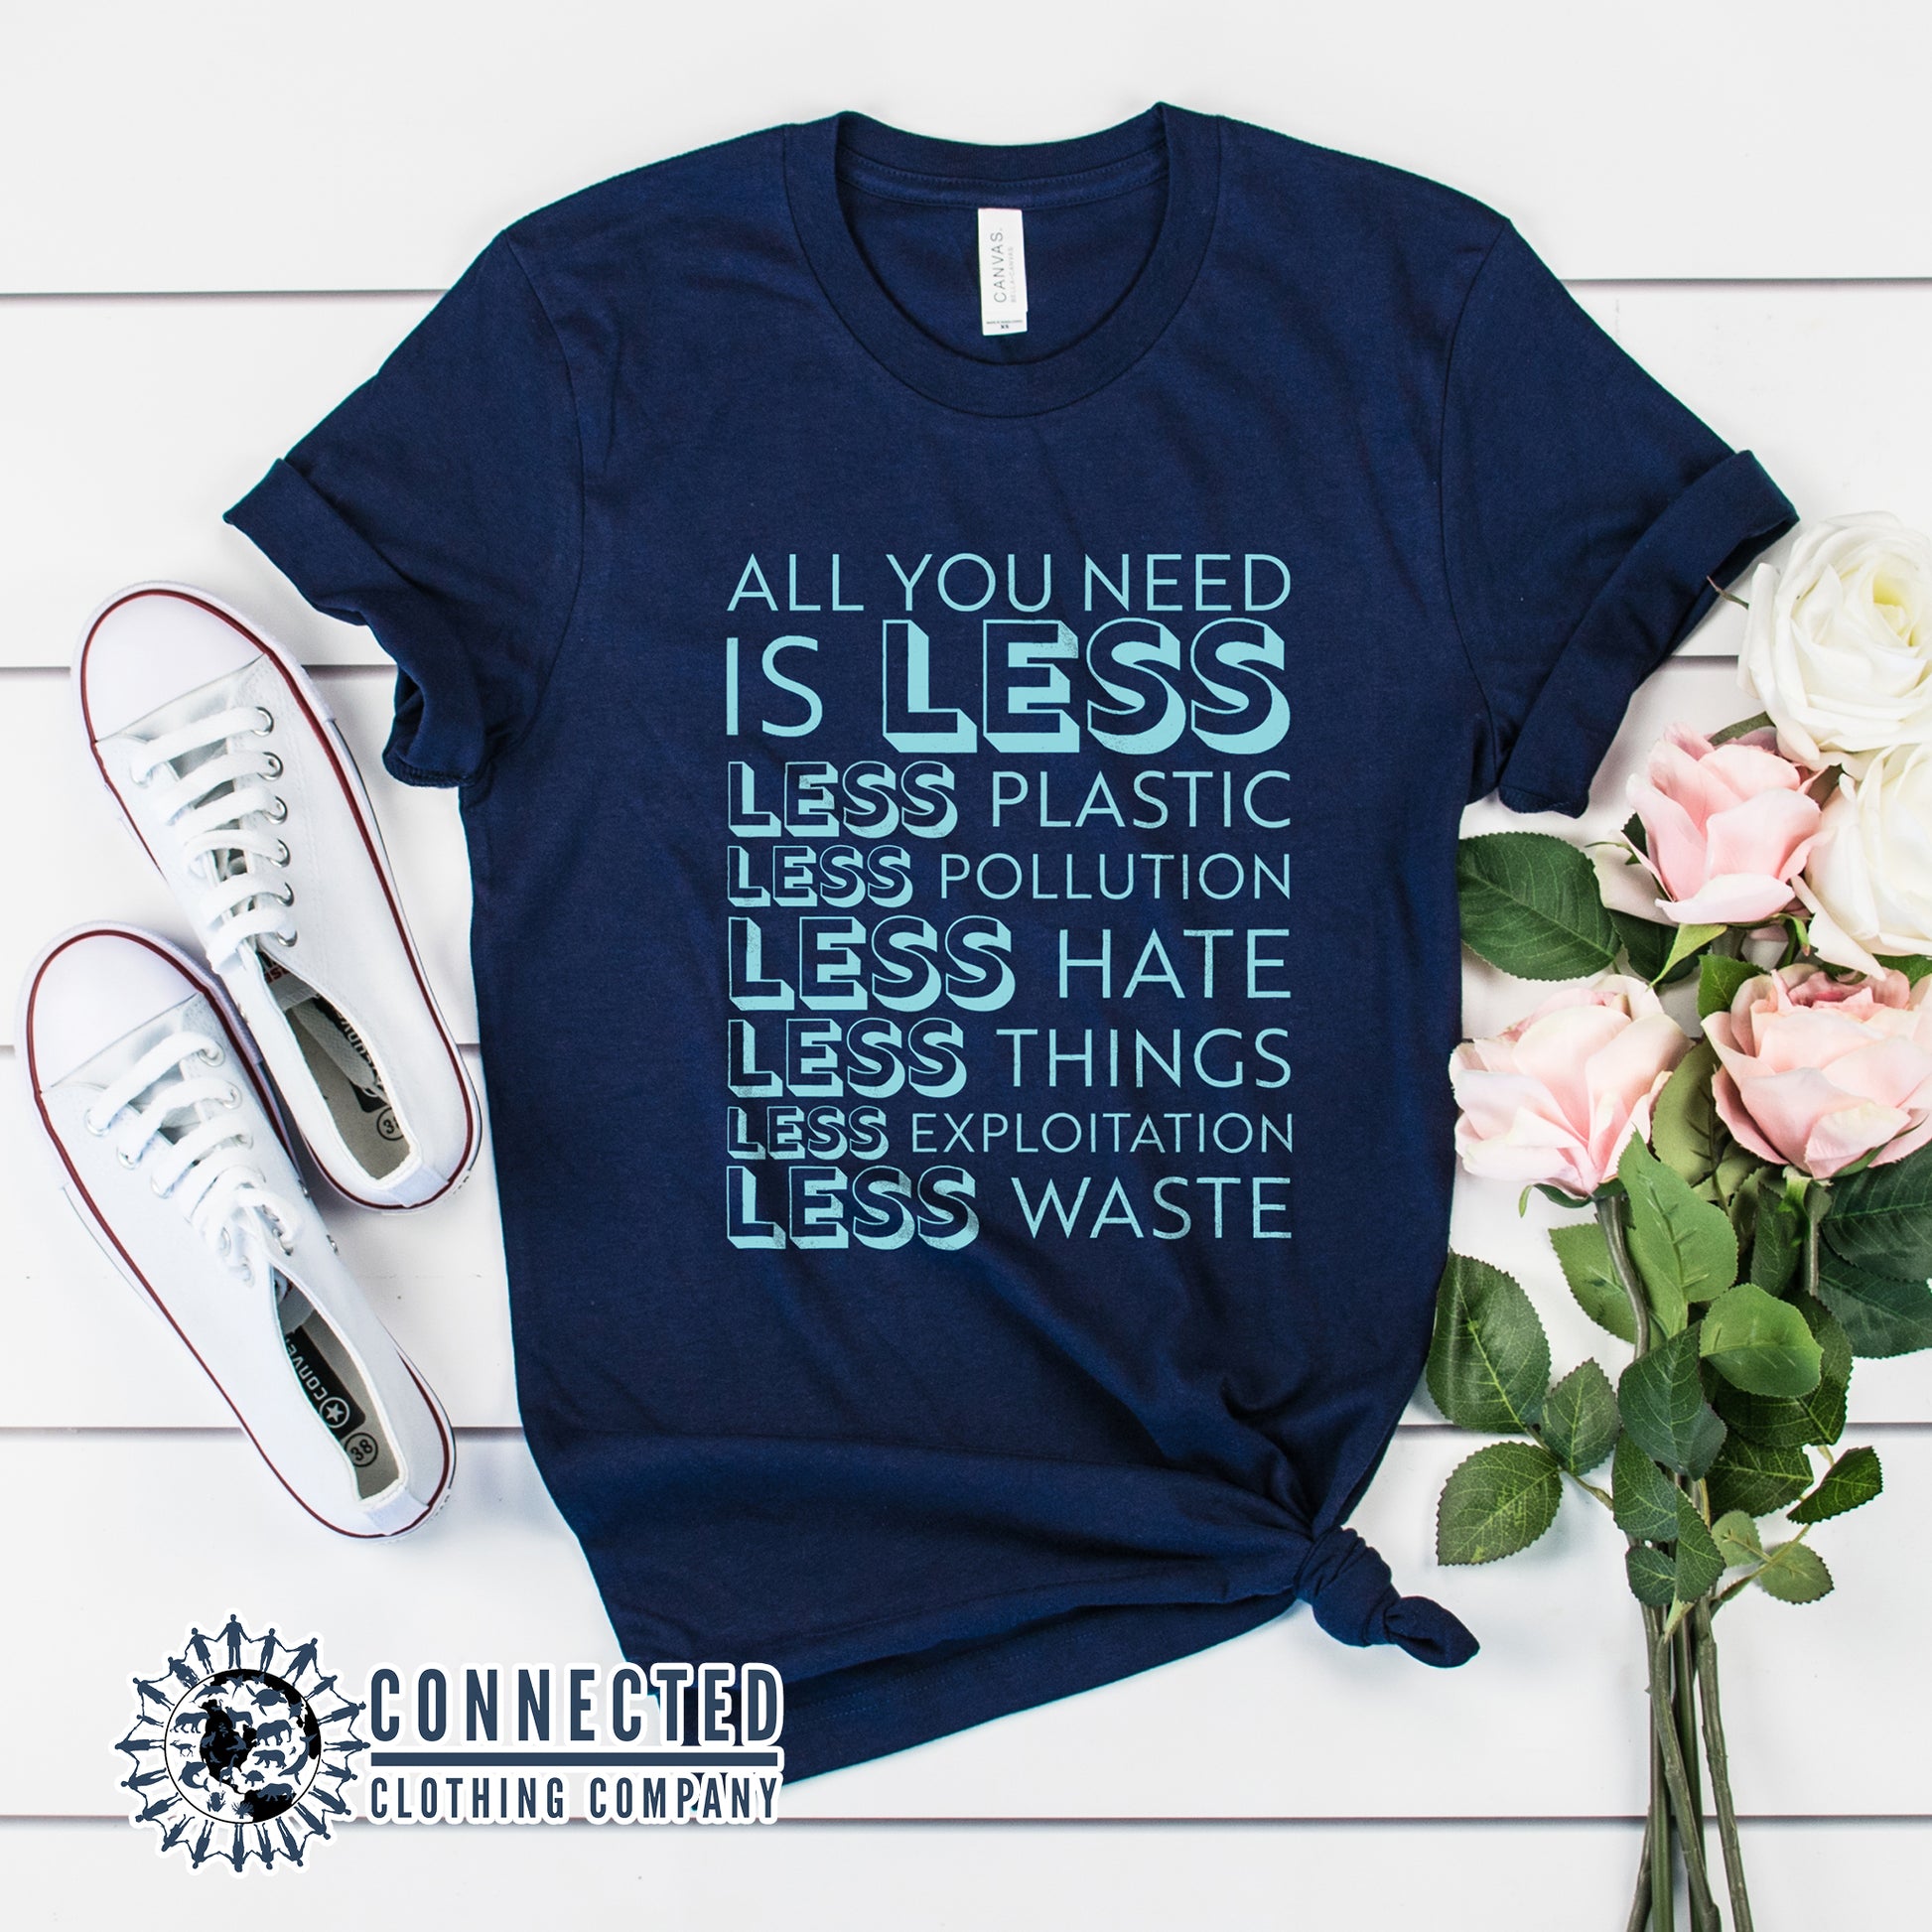 Navy Blue All You Need Is Less Short-Sleeve Unisex Tee reads "all you need is less. less plastic. less pollution. less hate. less things. less exploitation. less waste." - sweetsherriloudesigns - Ethically and Sustainably Made - 10% of profits donated to Mission Blue ocean conservation